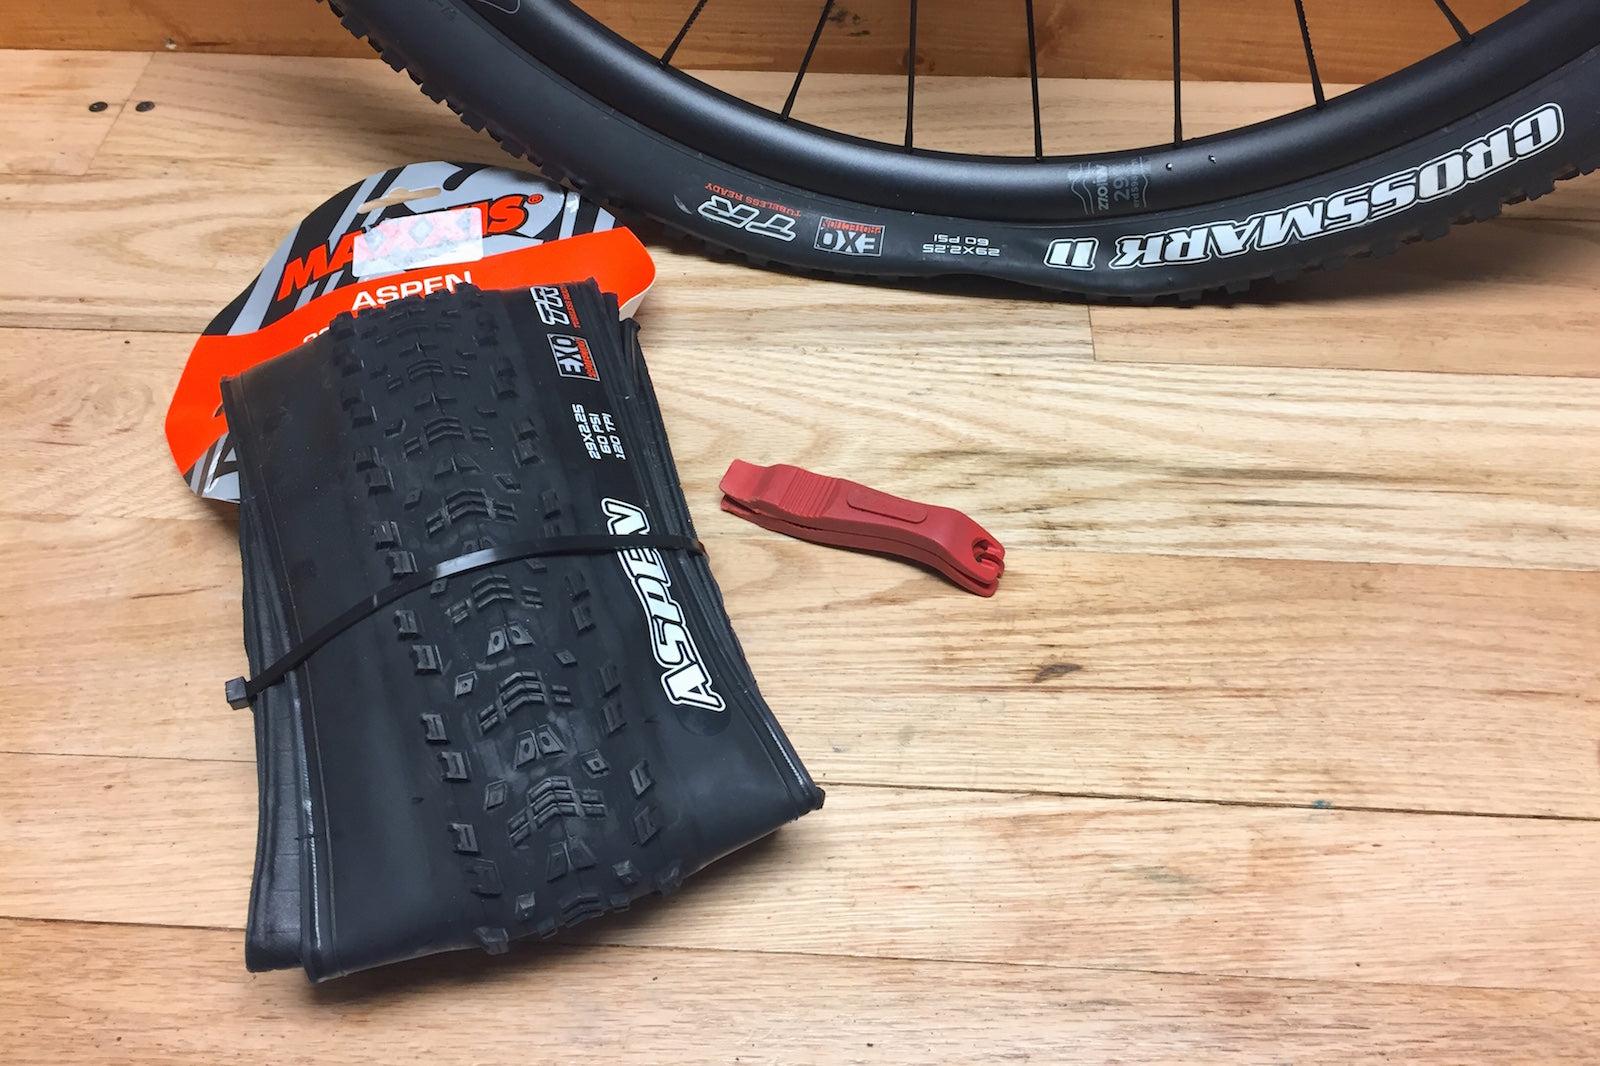 Maxxis Apsen Tire Review - Worldwide Cyclery